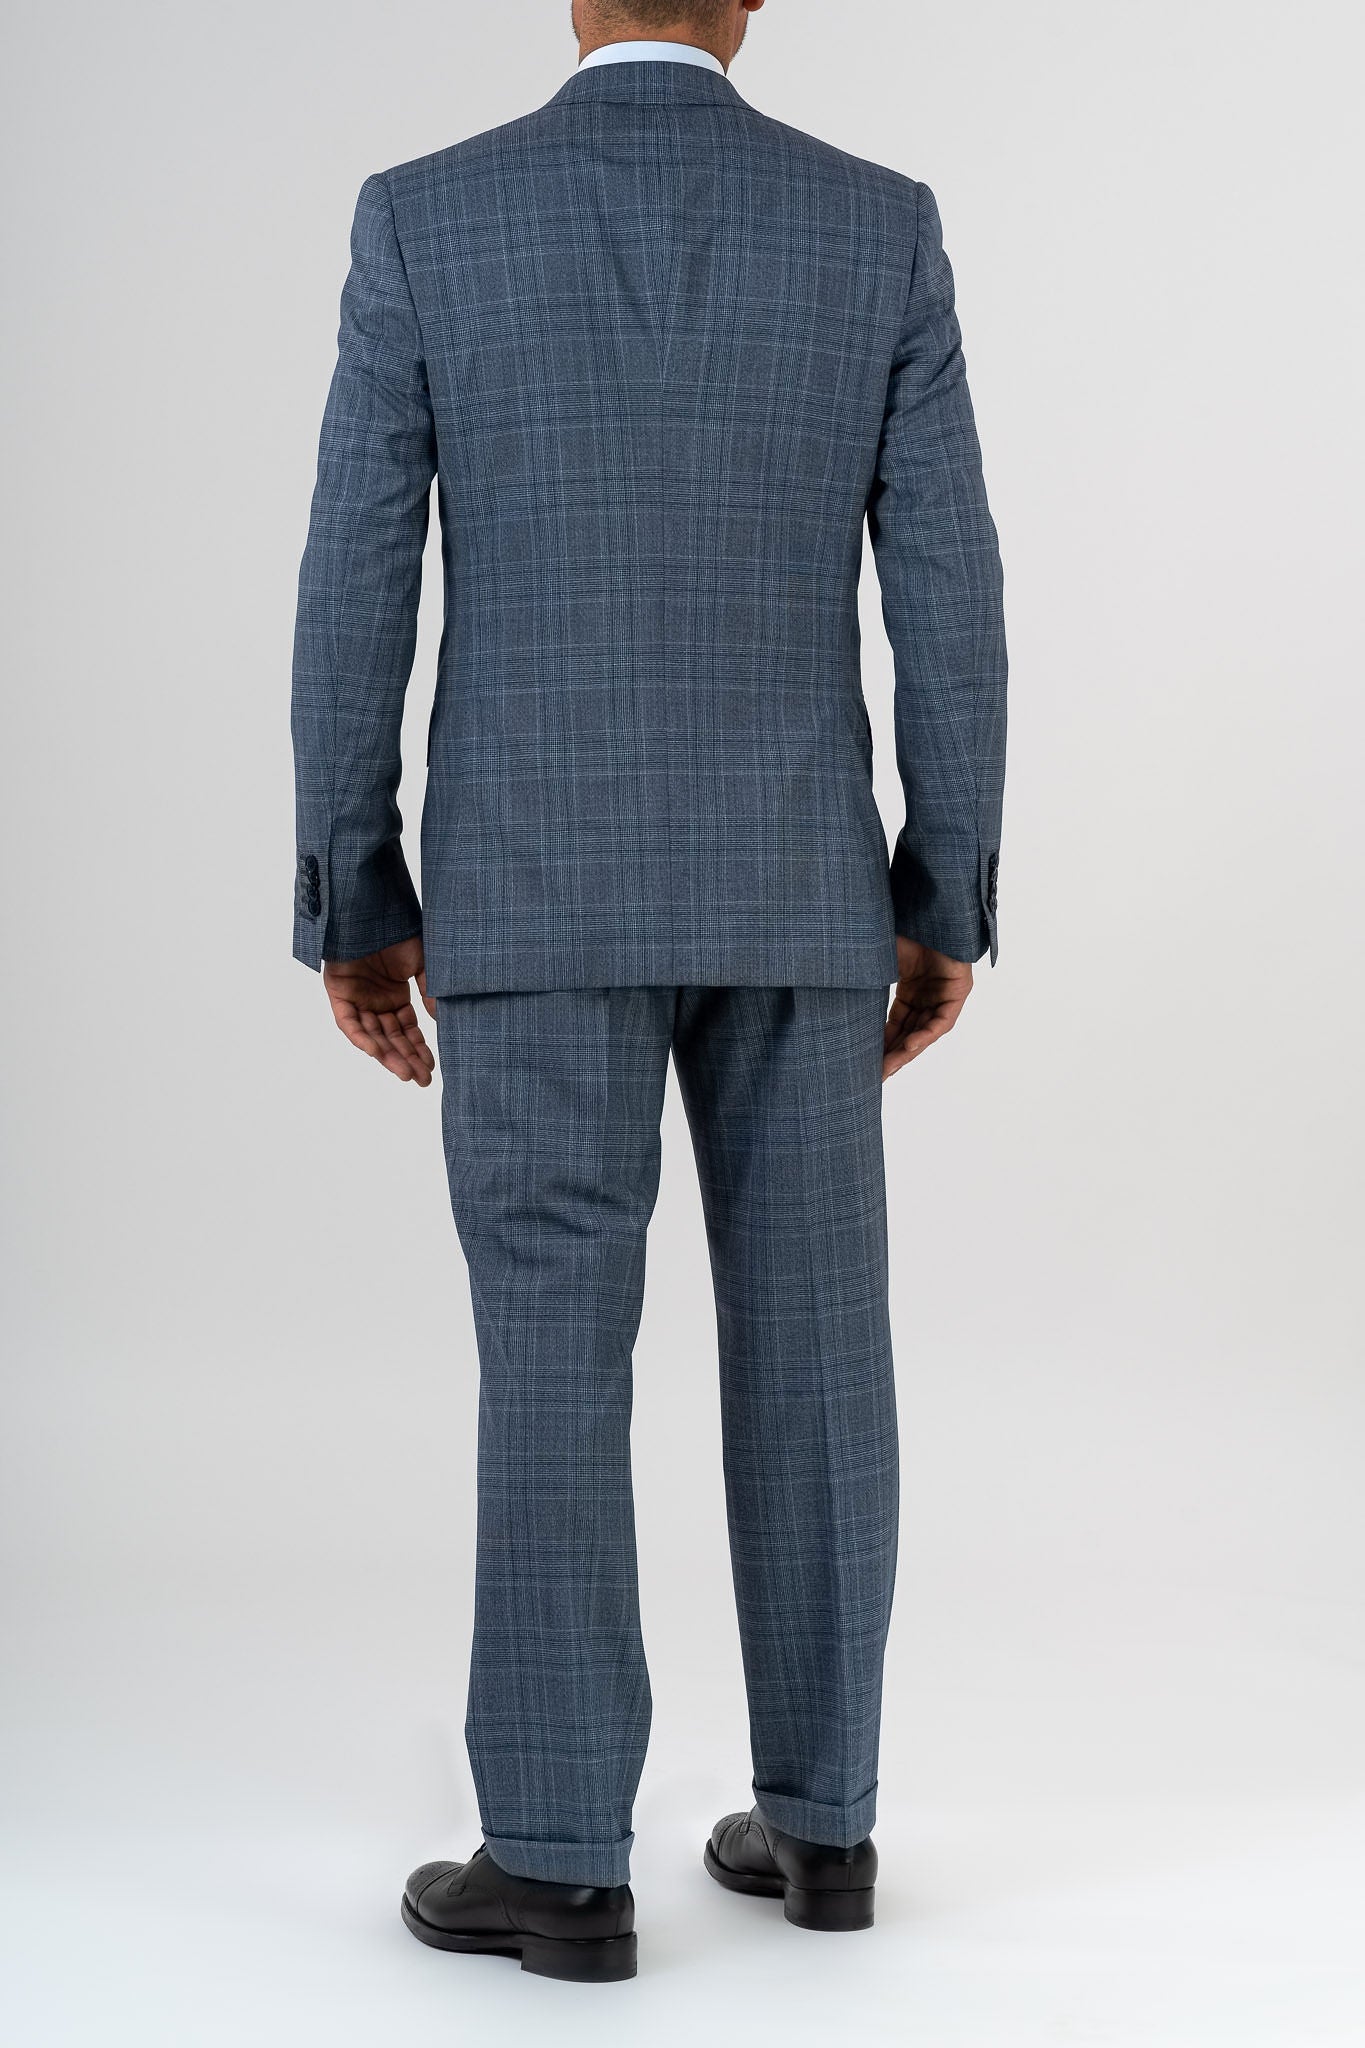 This elegant suit is made with 100% pure merino wool “Super 170s WISH” by Loro Piana. It is characterized by a checked design in shades of gray and light blue. This is a two-piece with two-button jacket with 3 pockets with flaps. One of these pockets is a watch pocket. The pants has regular rise and no darts, with american cut pockets and two back pockets. Belt with loops and zip on the front. -  Sartoria dei Duchi.